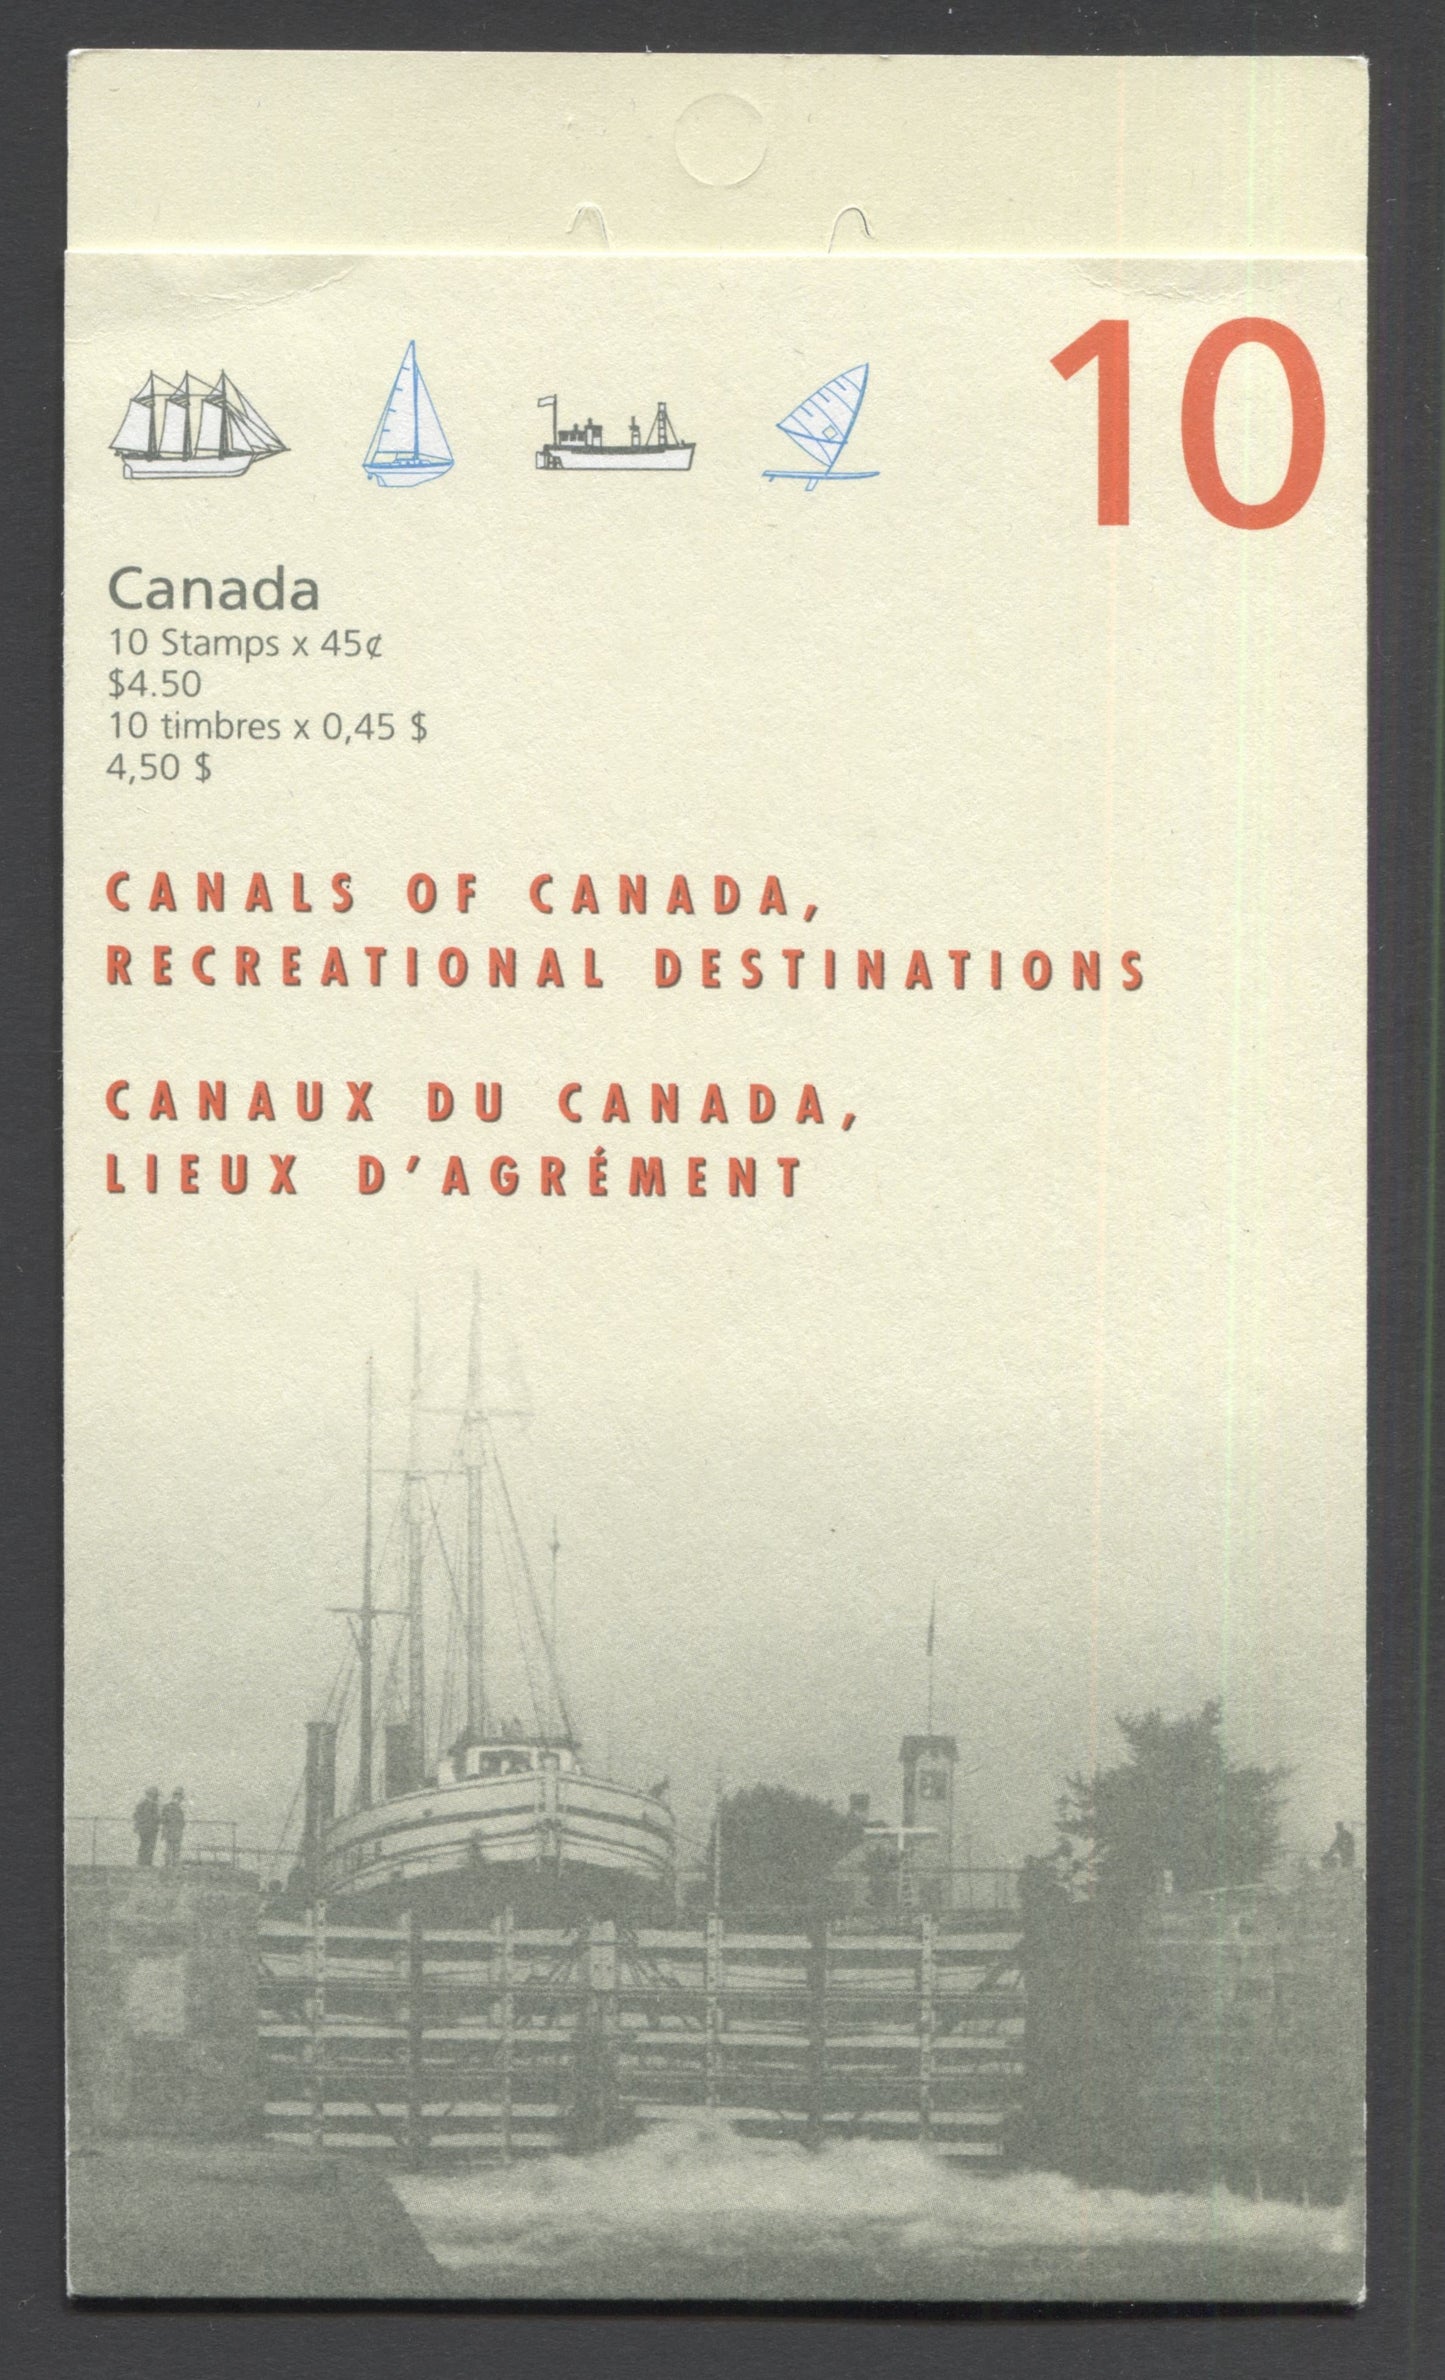 Canada #BK208a-b 1998 Canals Issue, Complete $4.50 Booklet, Tullis Russell Coatings Paper, Dead Paper, 4 mm GT-4 Tagging